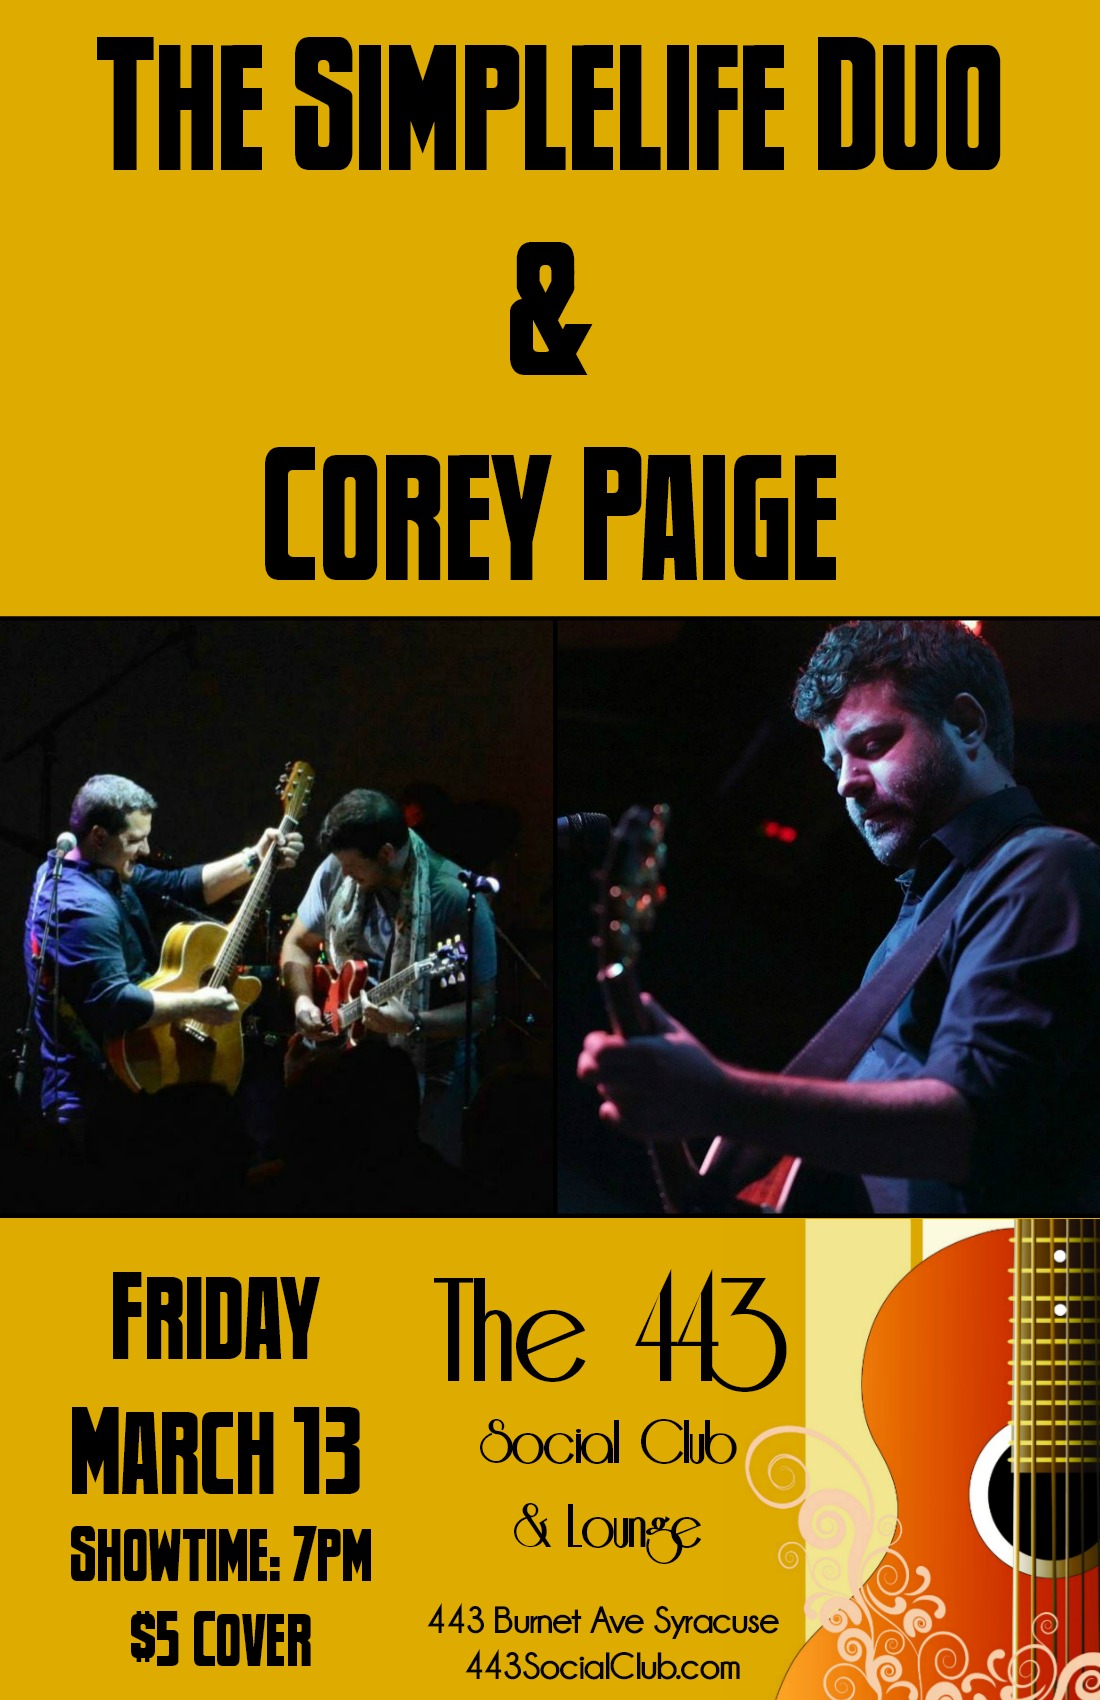 Simplelife Duo & Corey Paige - 3/13 - The 443 Social Club & Lounge